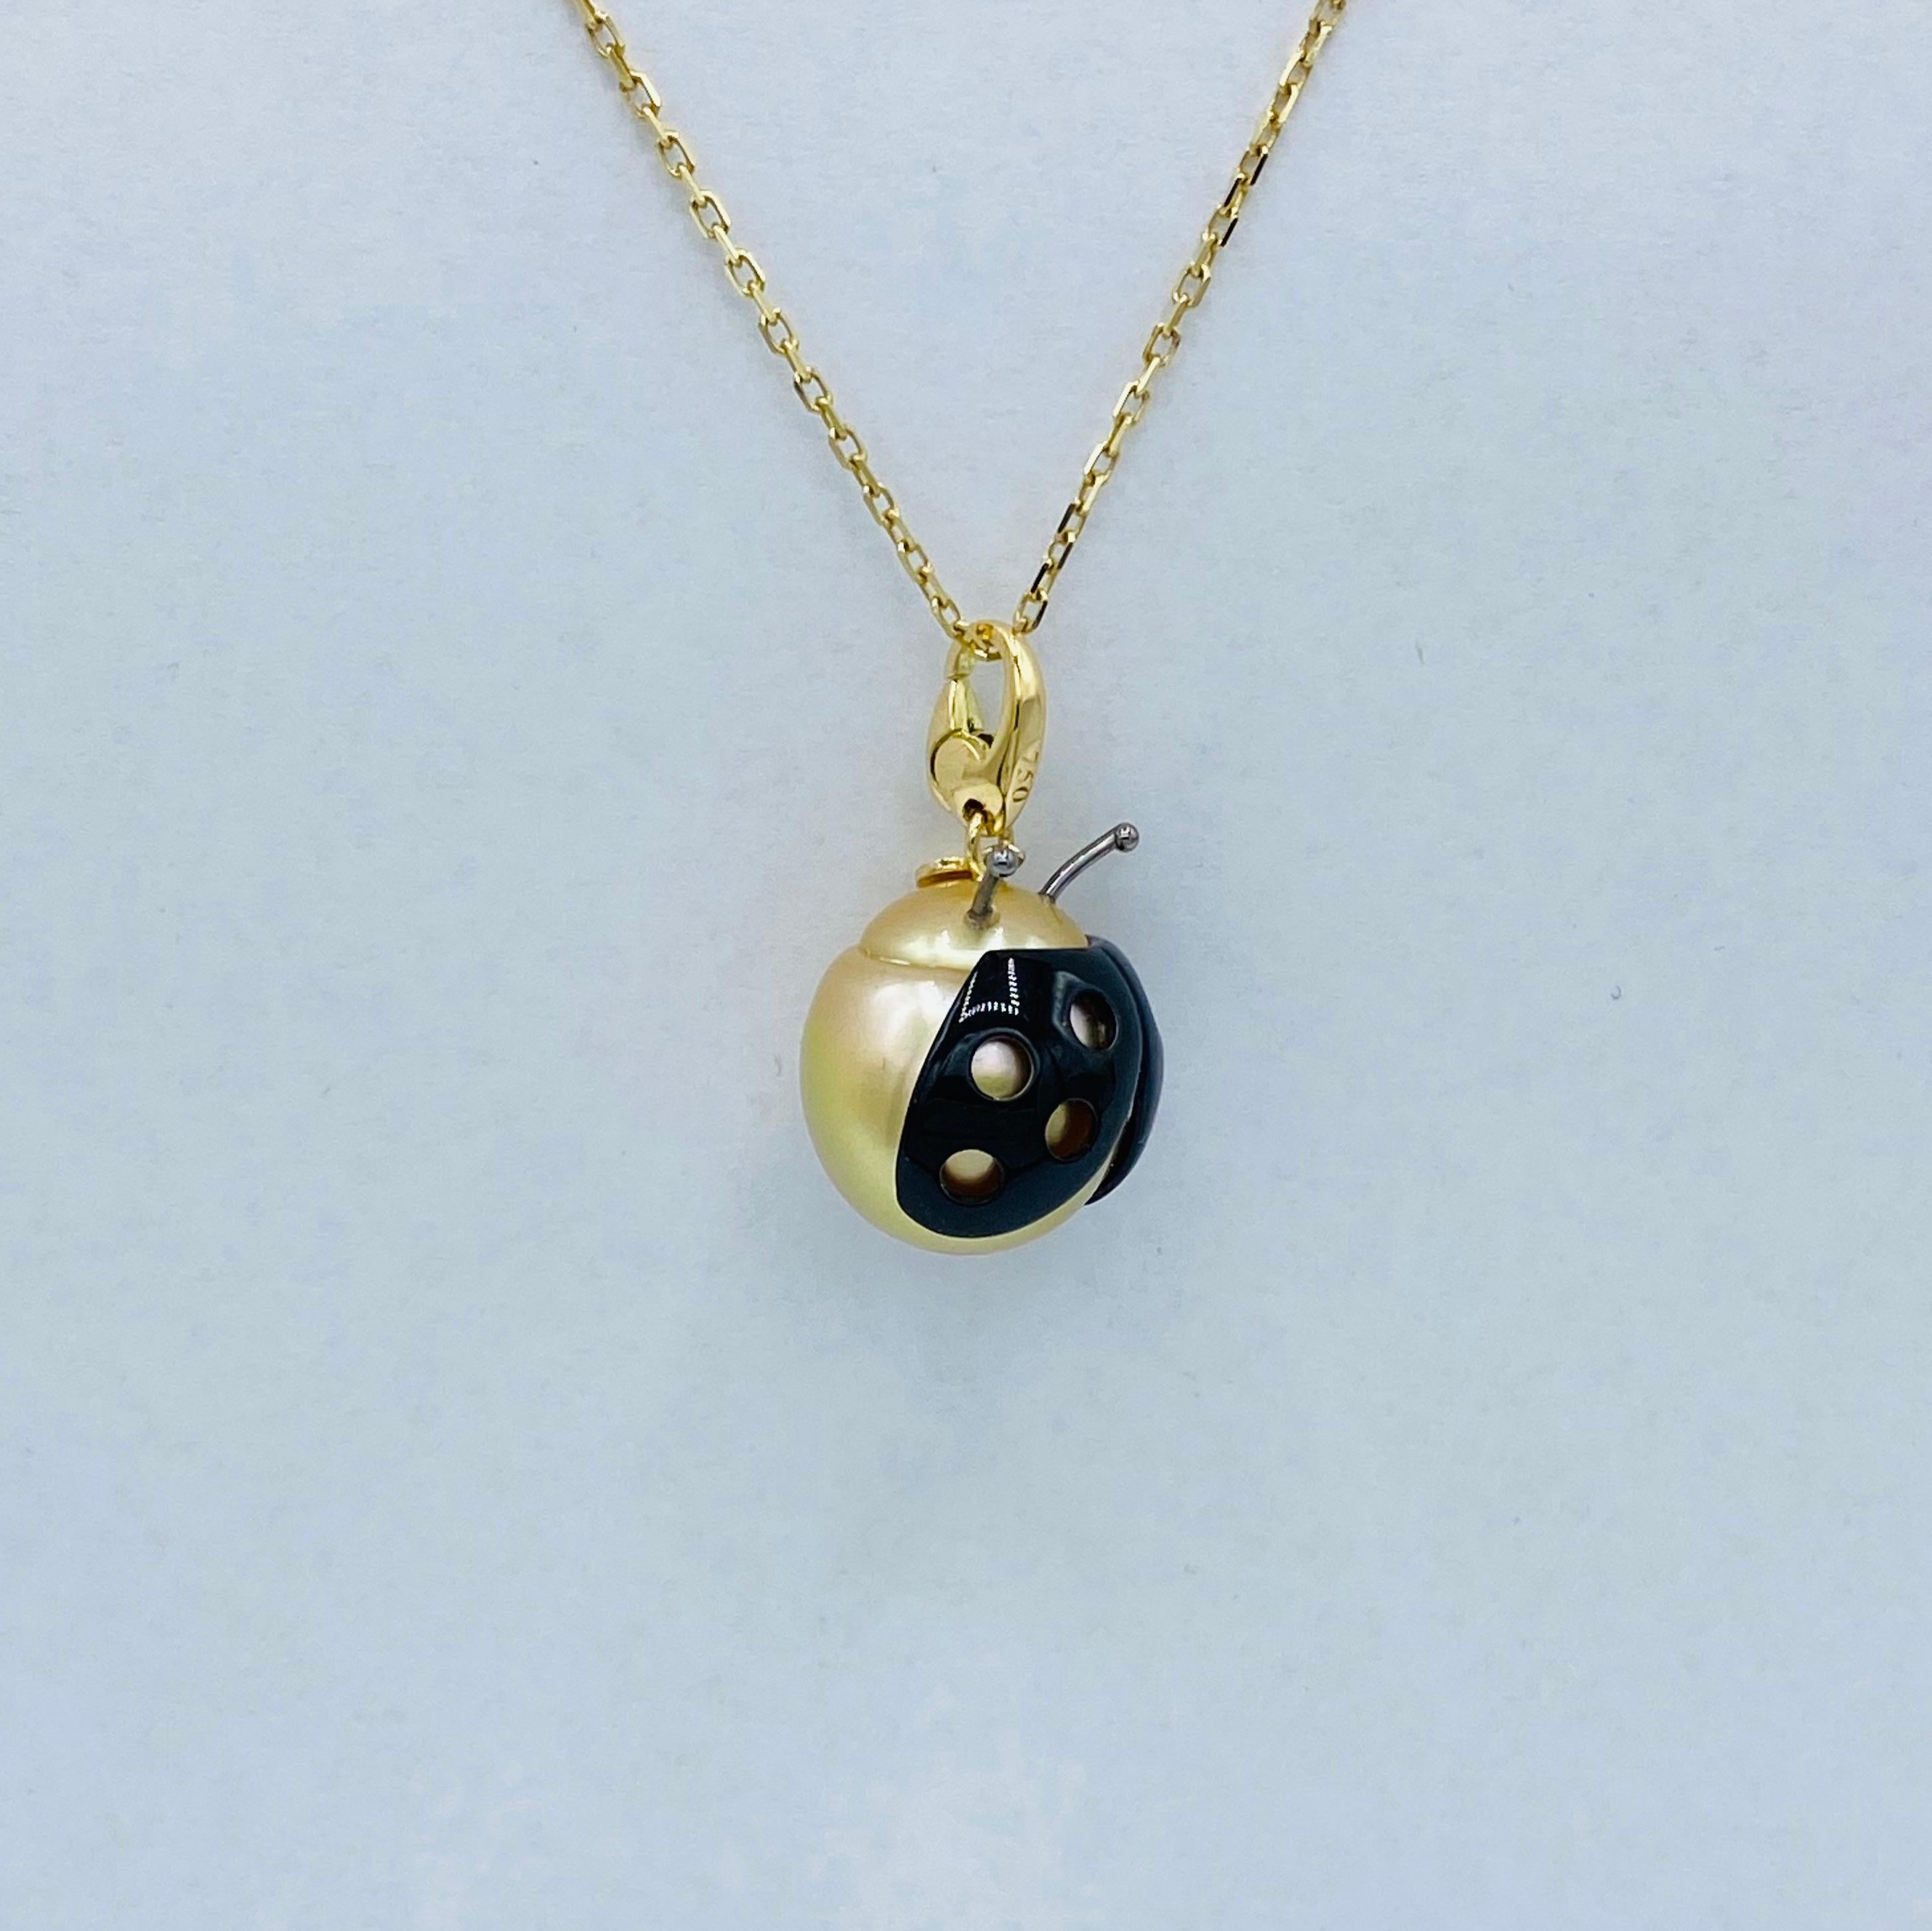 Ladybug/Ladybird 18 Kt Red White Gold Australian Pearl Pendant Necklace Made in Italy
A very beautiful and big gold Australian pearl has been carefully crafted to make a ladybug, It is often used as a lucky pendant.   

Its wings are in white gold